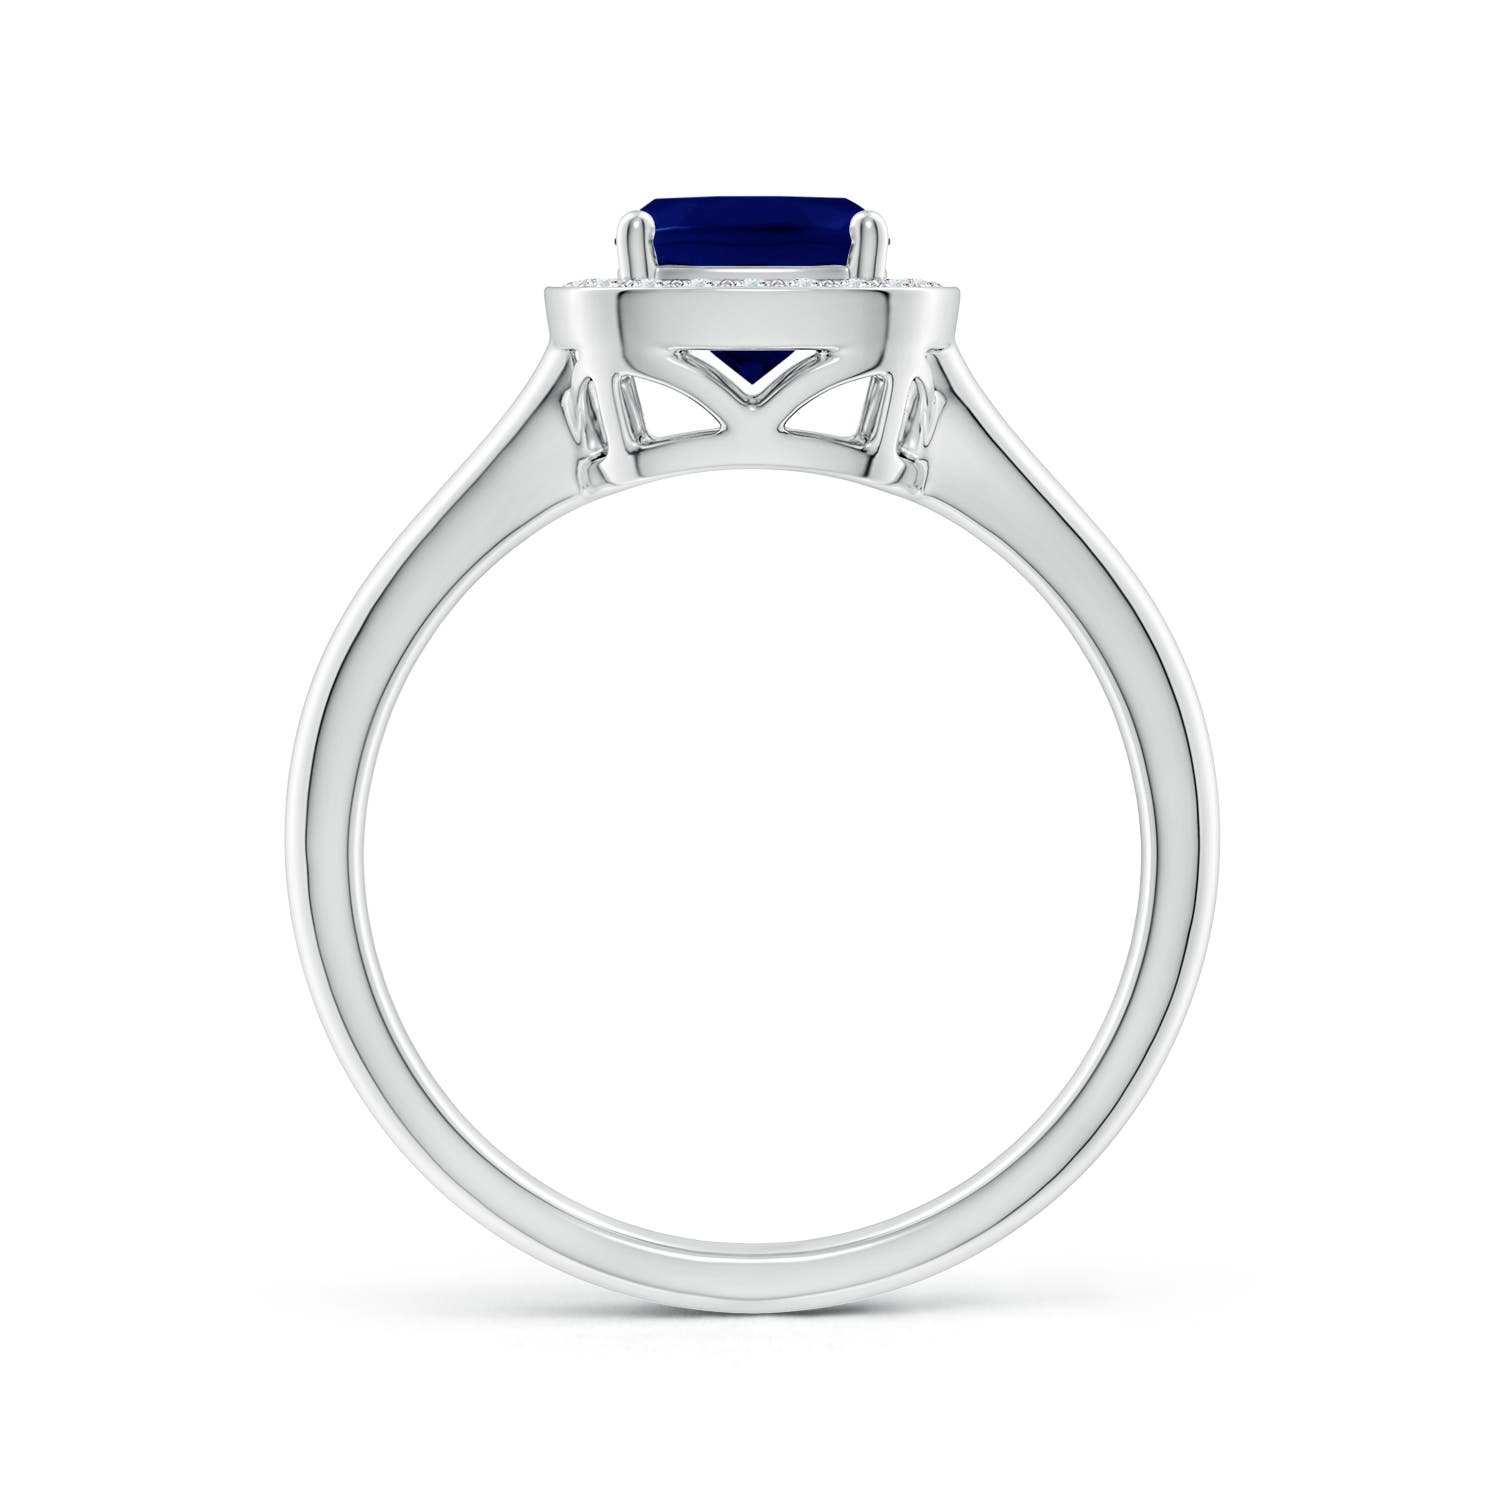 AA - Blue Sapphire / 0.68 CT / 14 KT White Gold